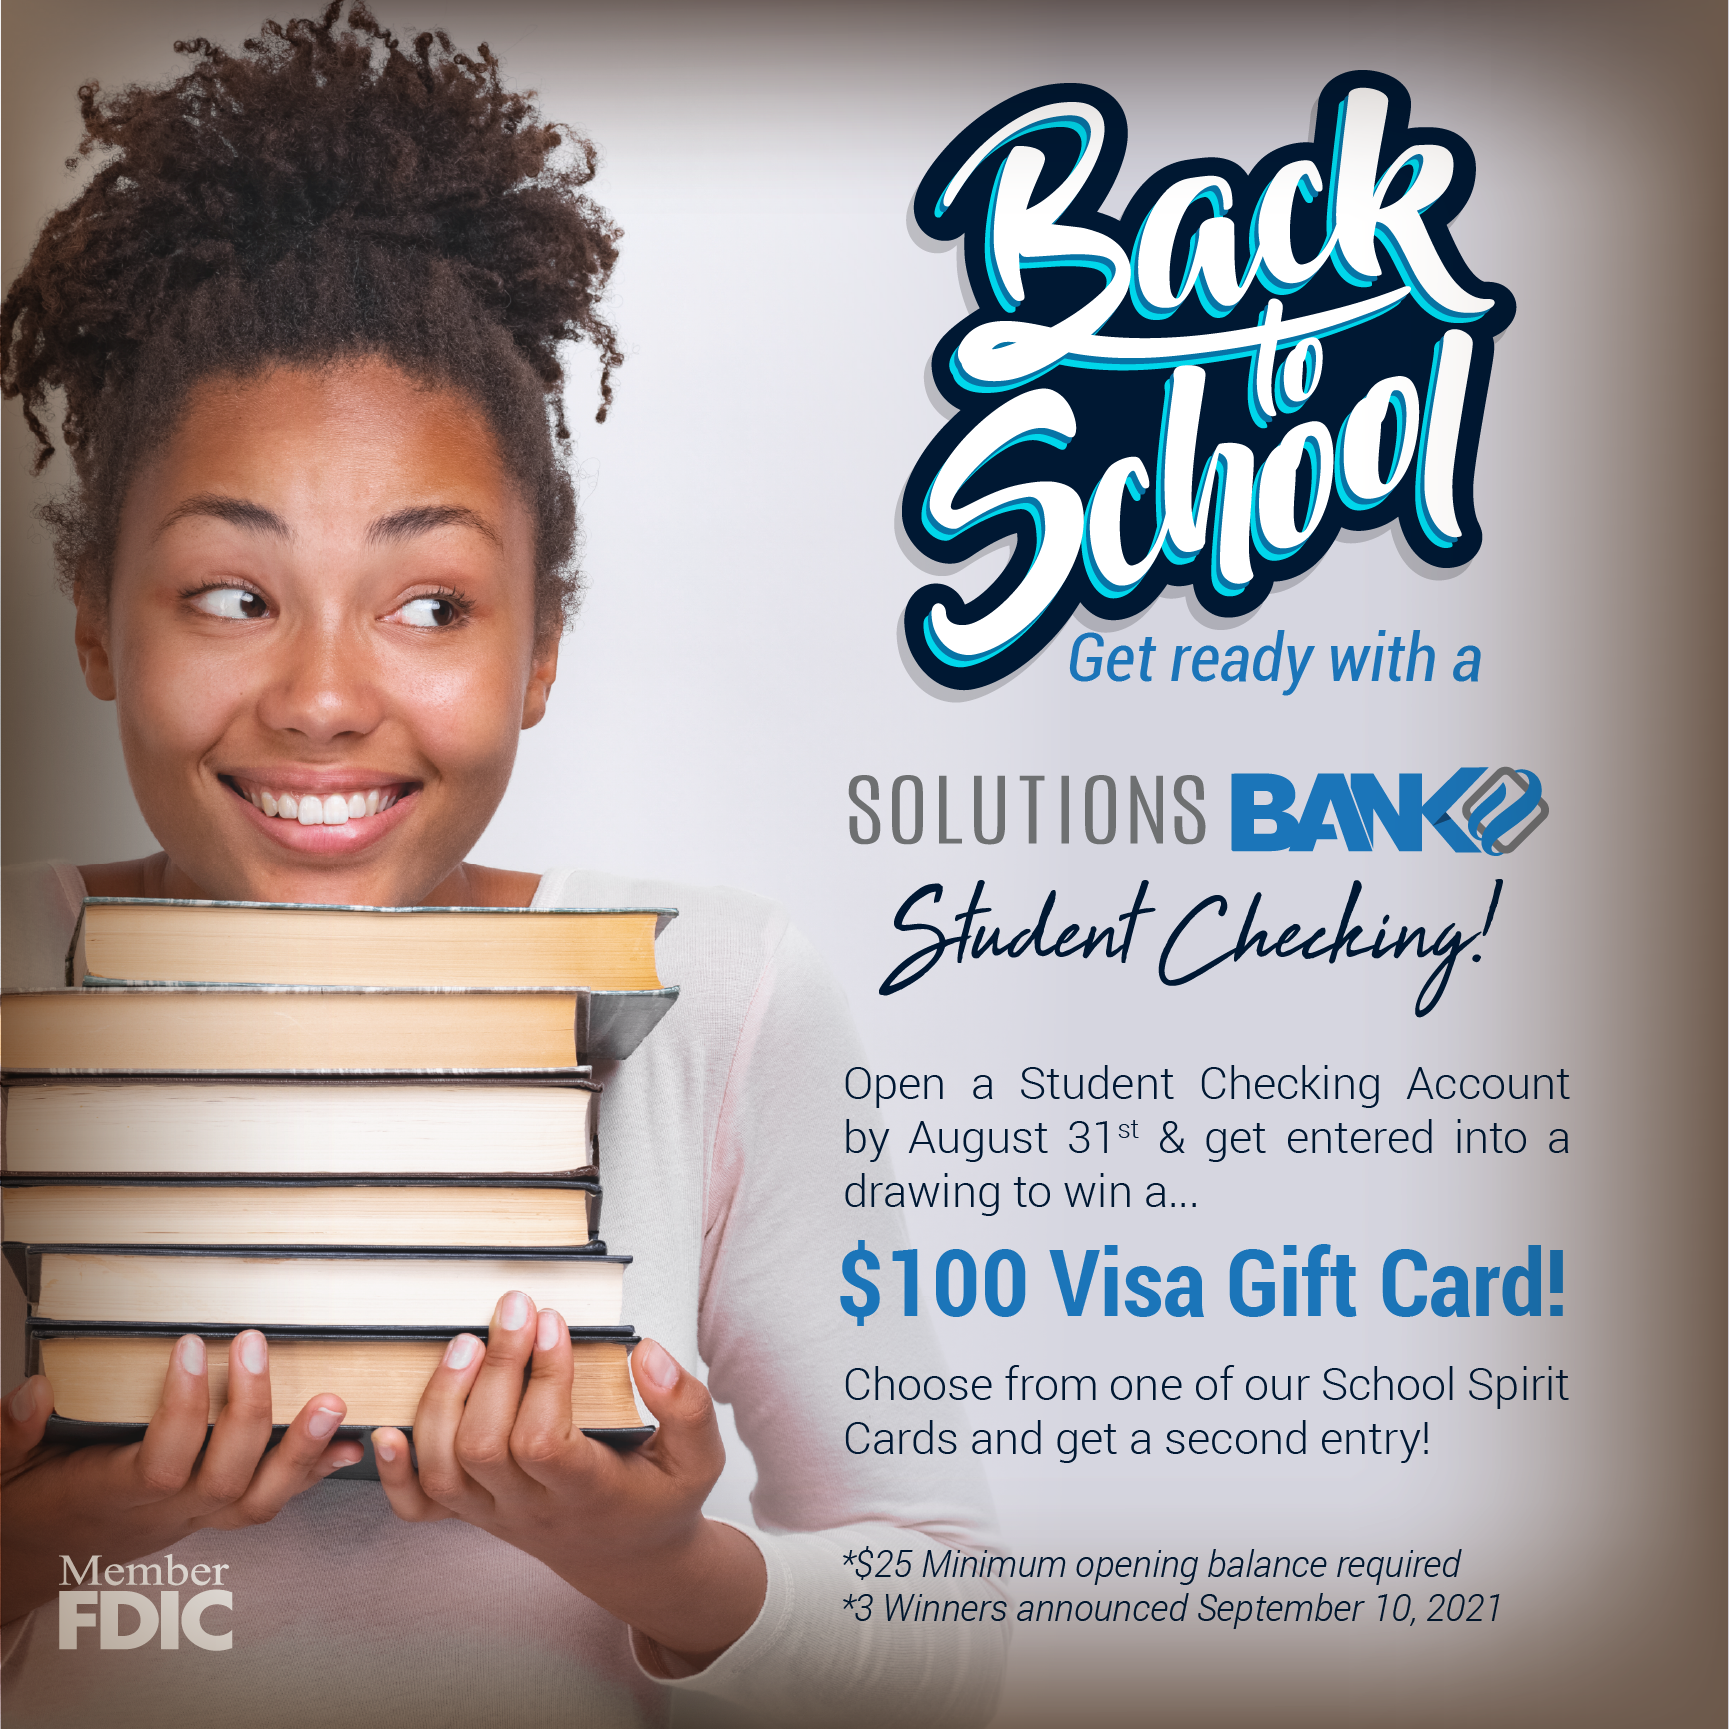 Back to School - Student Checking Promo - Square